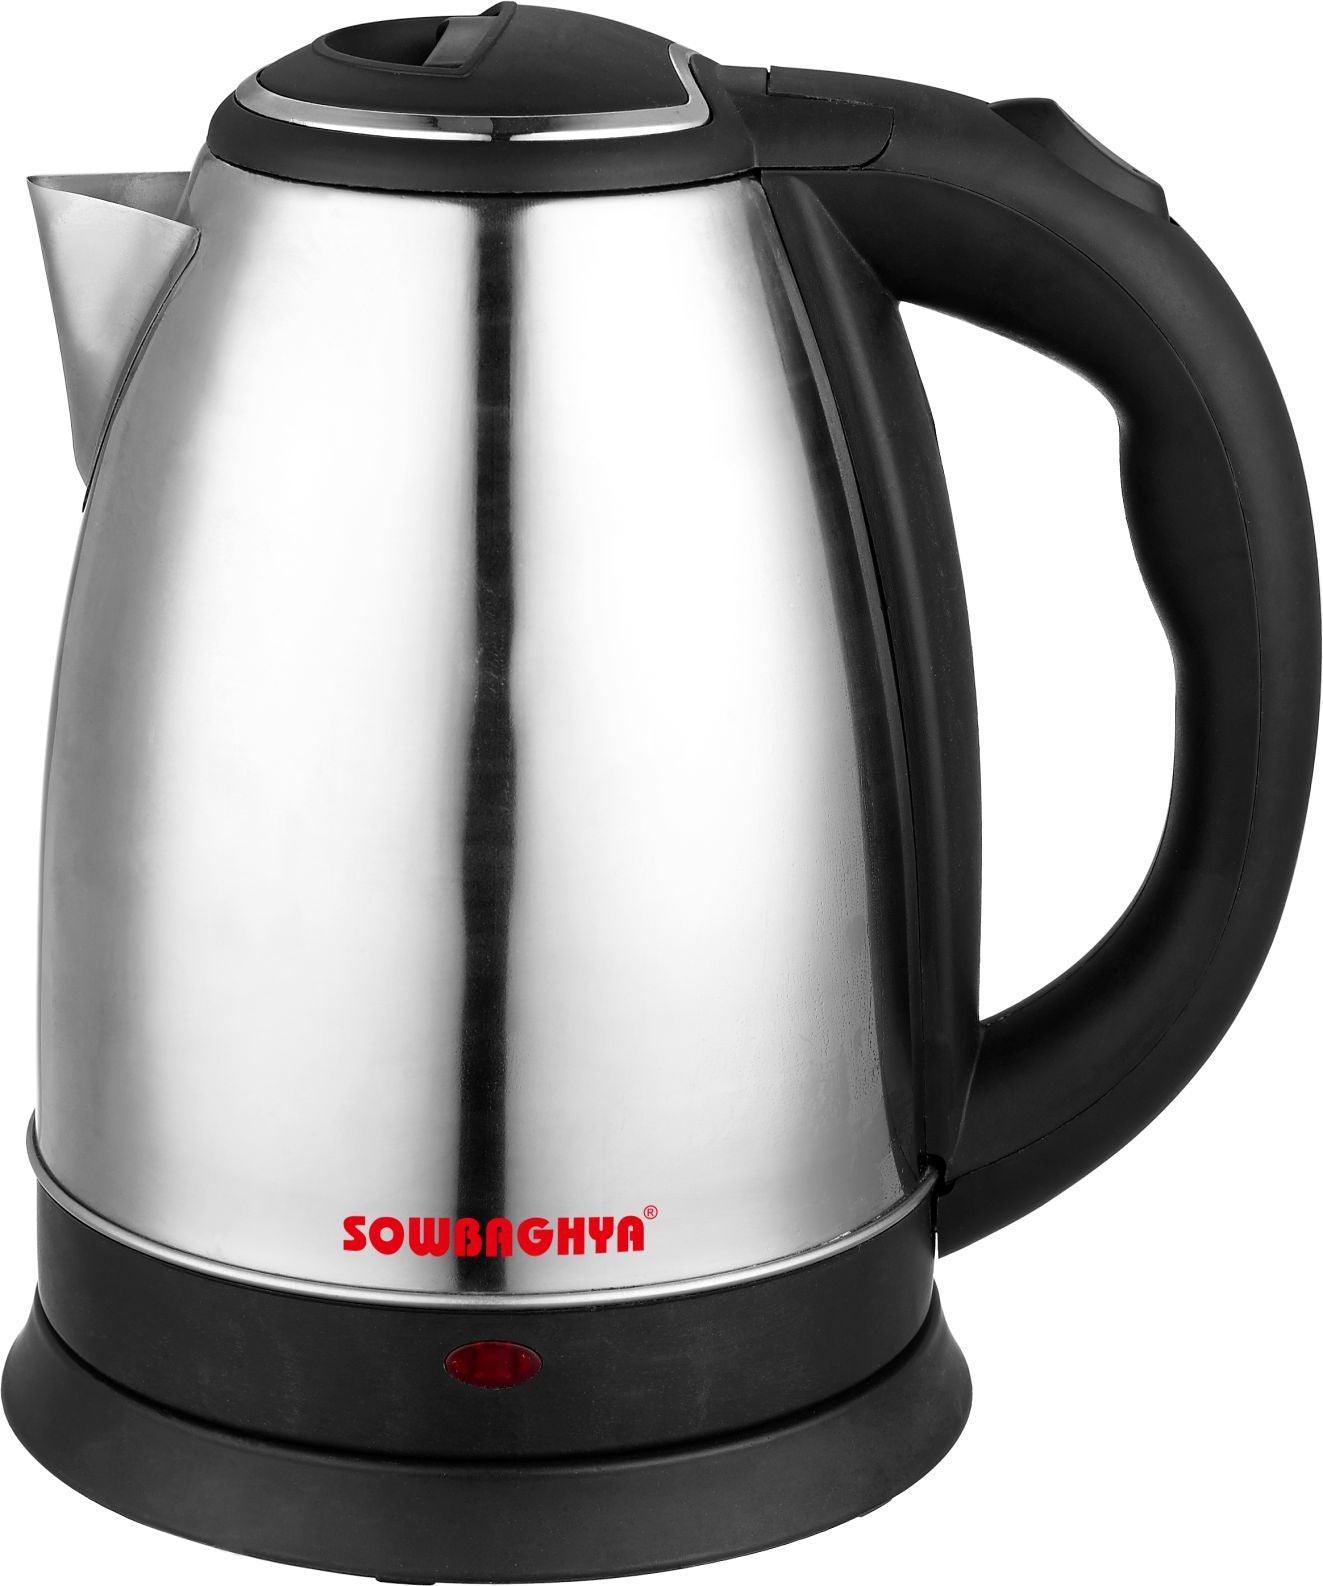 Stainless Steel 1.5Ltrs Water Kettle - SOWBAGHYA